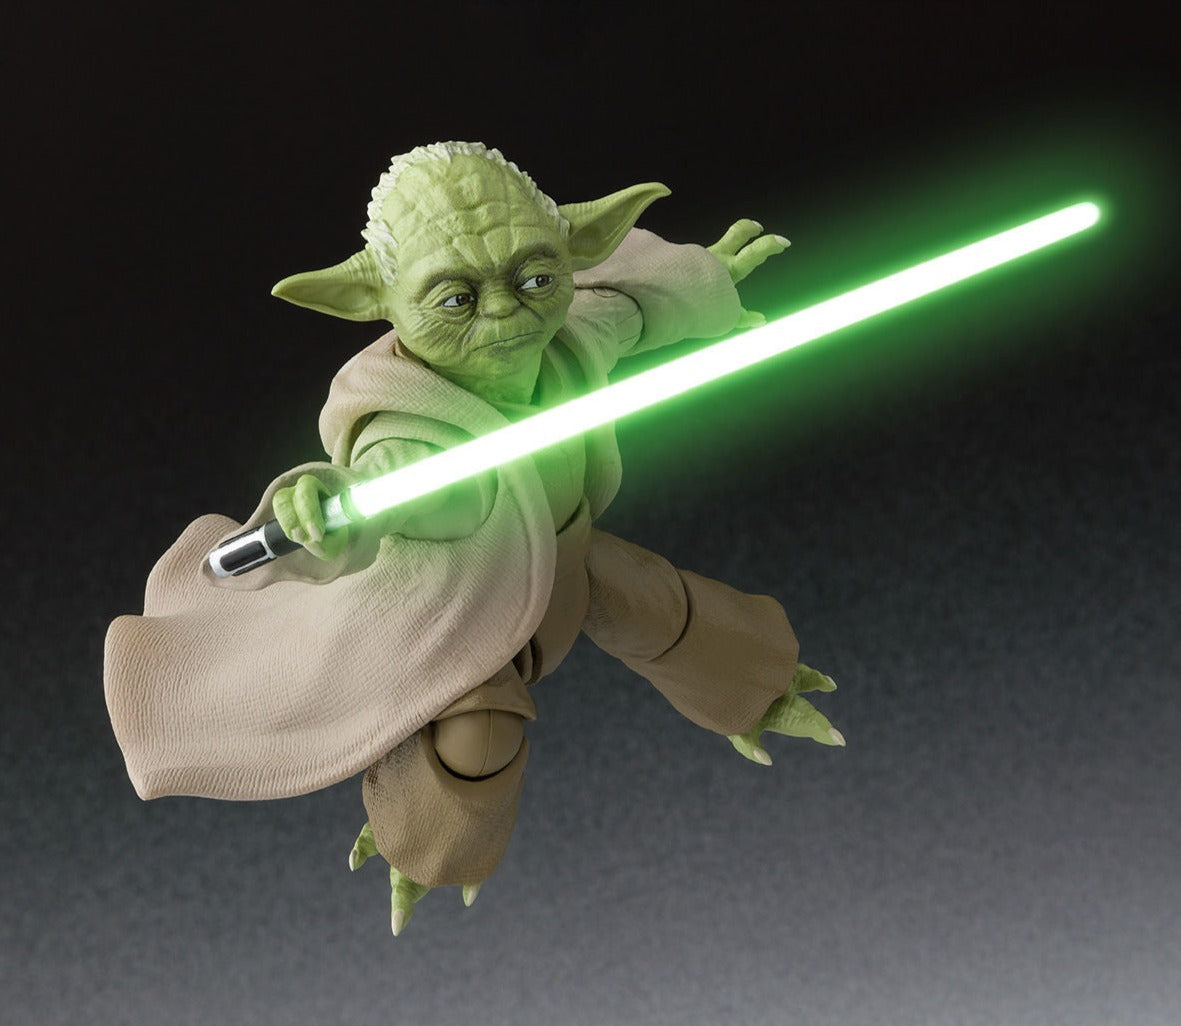 S.H. Figuarts Yoda Revenge of the Sith Star Wars Episode III Action Figure 1